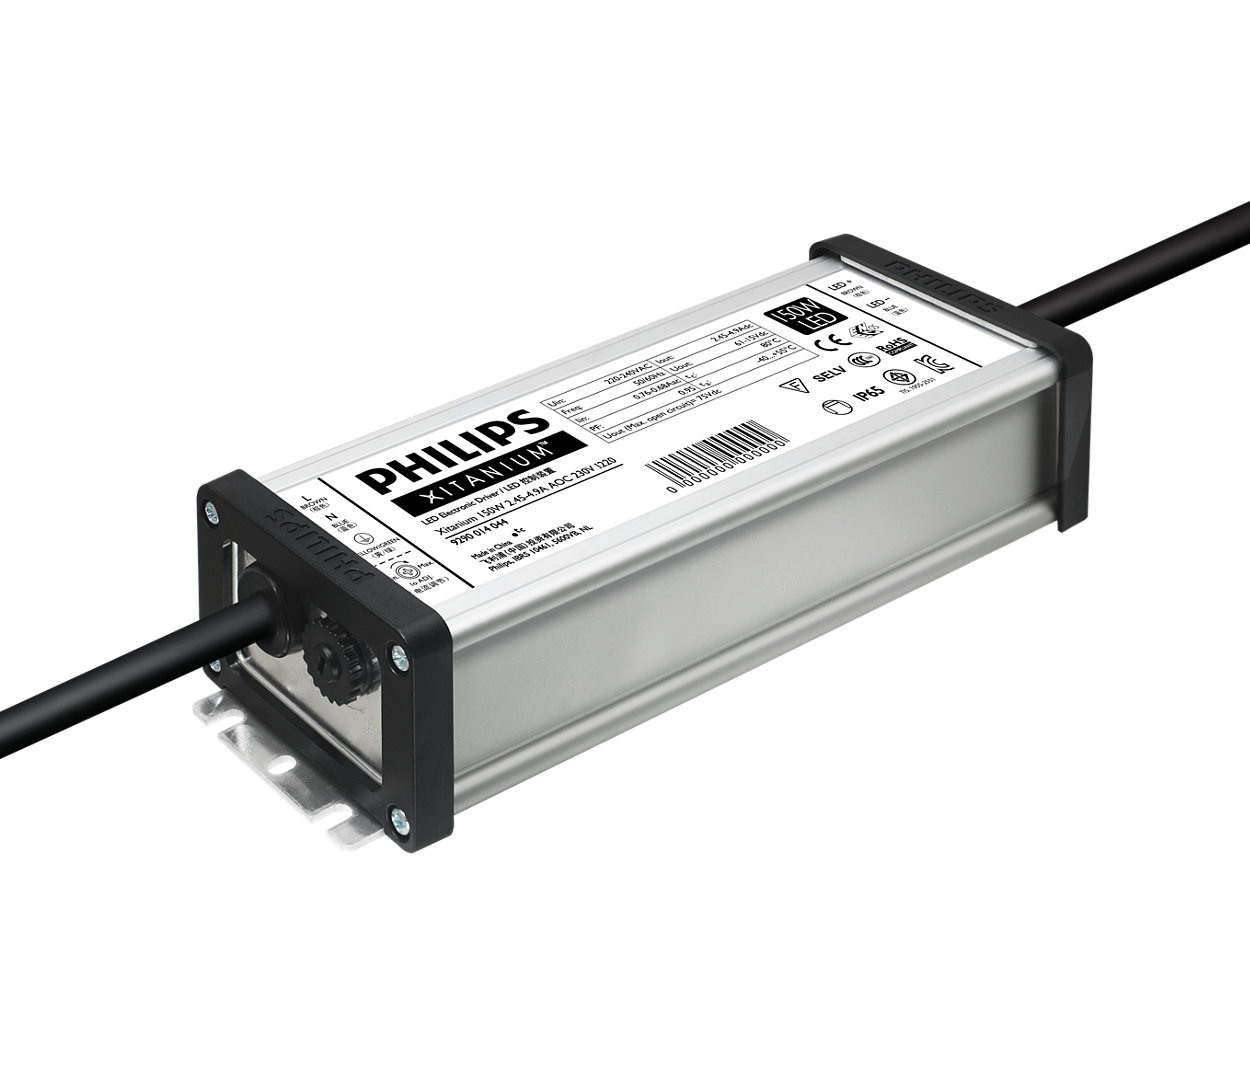 Reliable, high performance technology for extreme LED applications